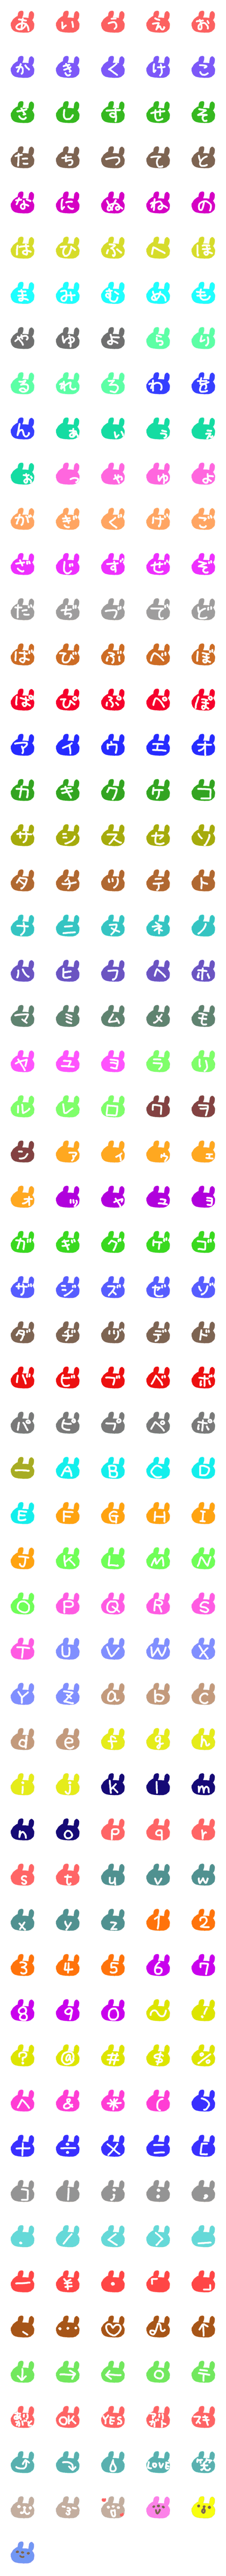 [LINE絵文字]うさぎさんの形の絵文字の画像一覧